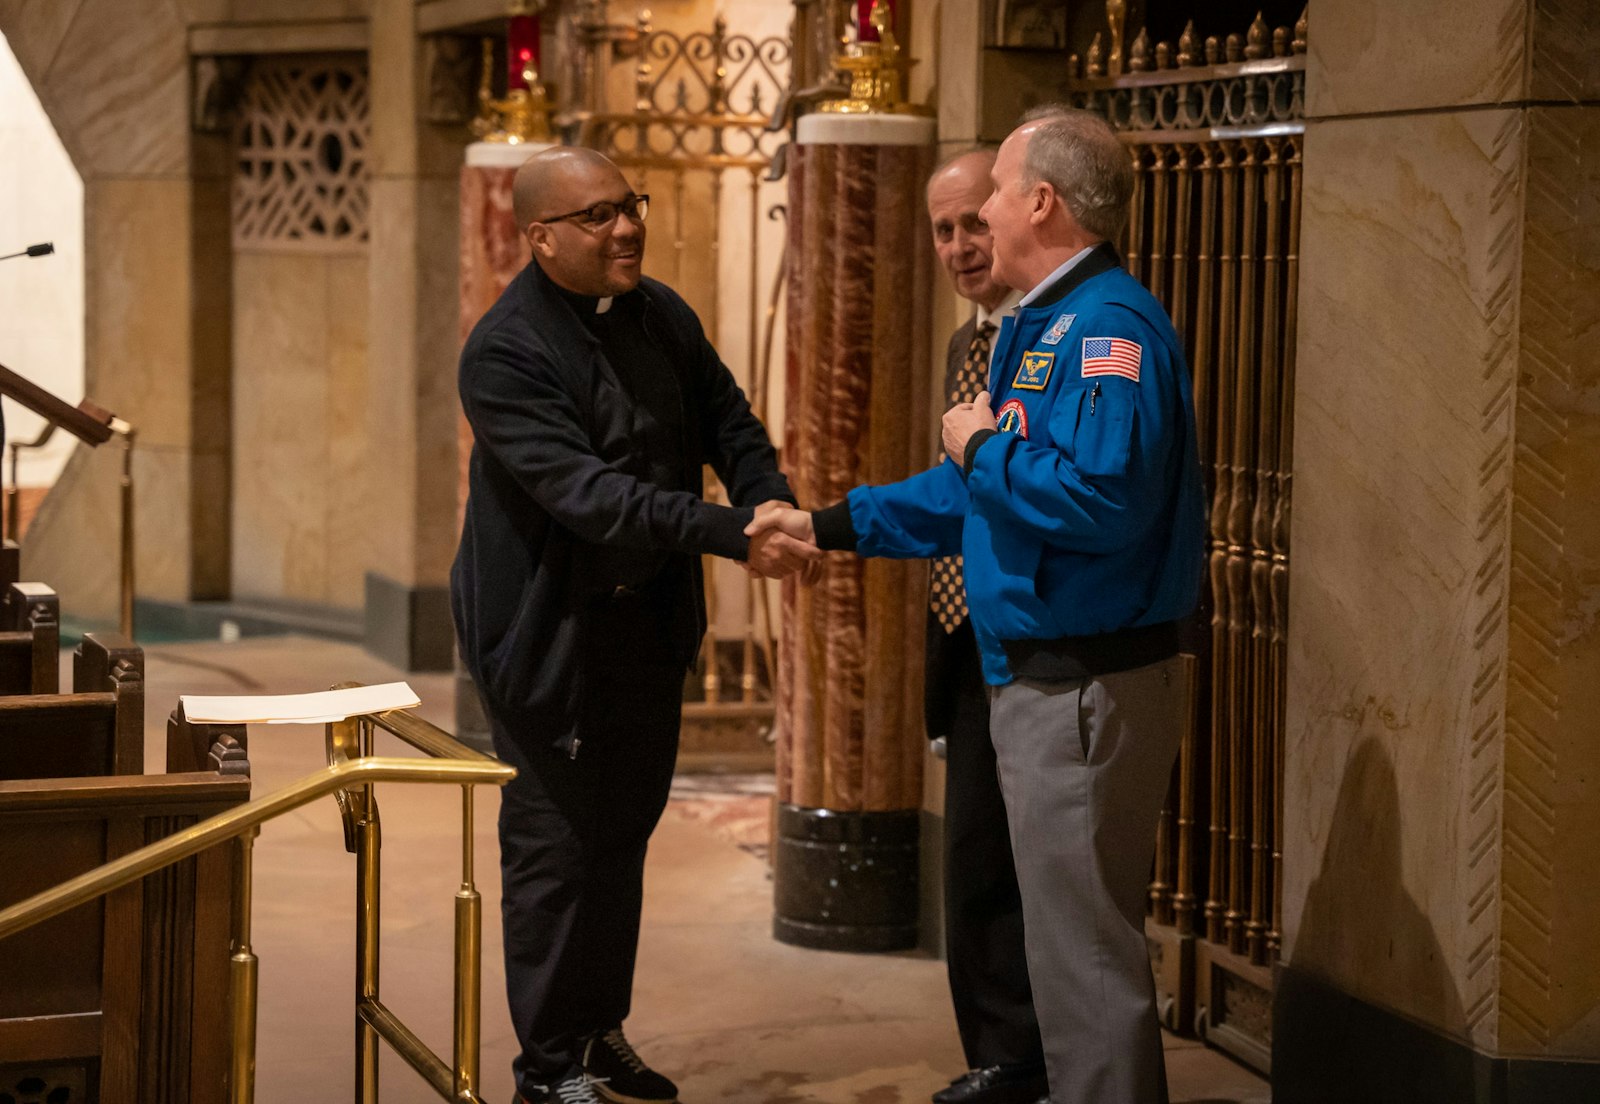 Jones shakes hands with Shrine associate pastor, Fr. John McKenzie, during the “Live at the Basilica” speaker event April 6. Jones spoke how he and two other astronauts were able to take in communion while on mission in outer space, and how much he relied on God in praying for the success and safety of the mission.